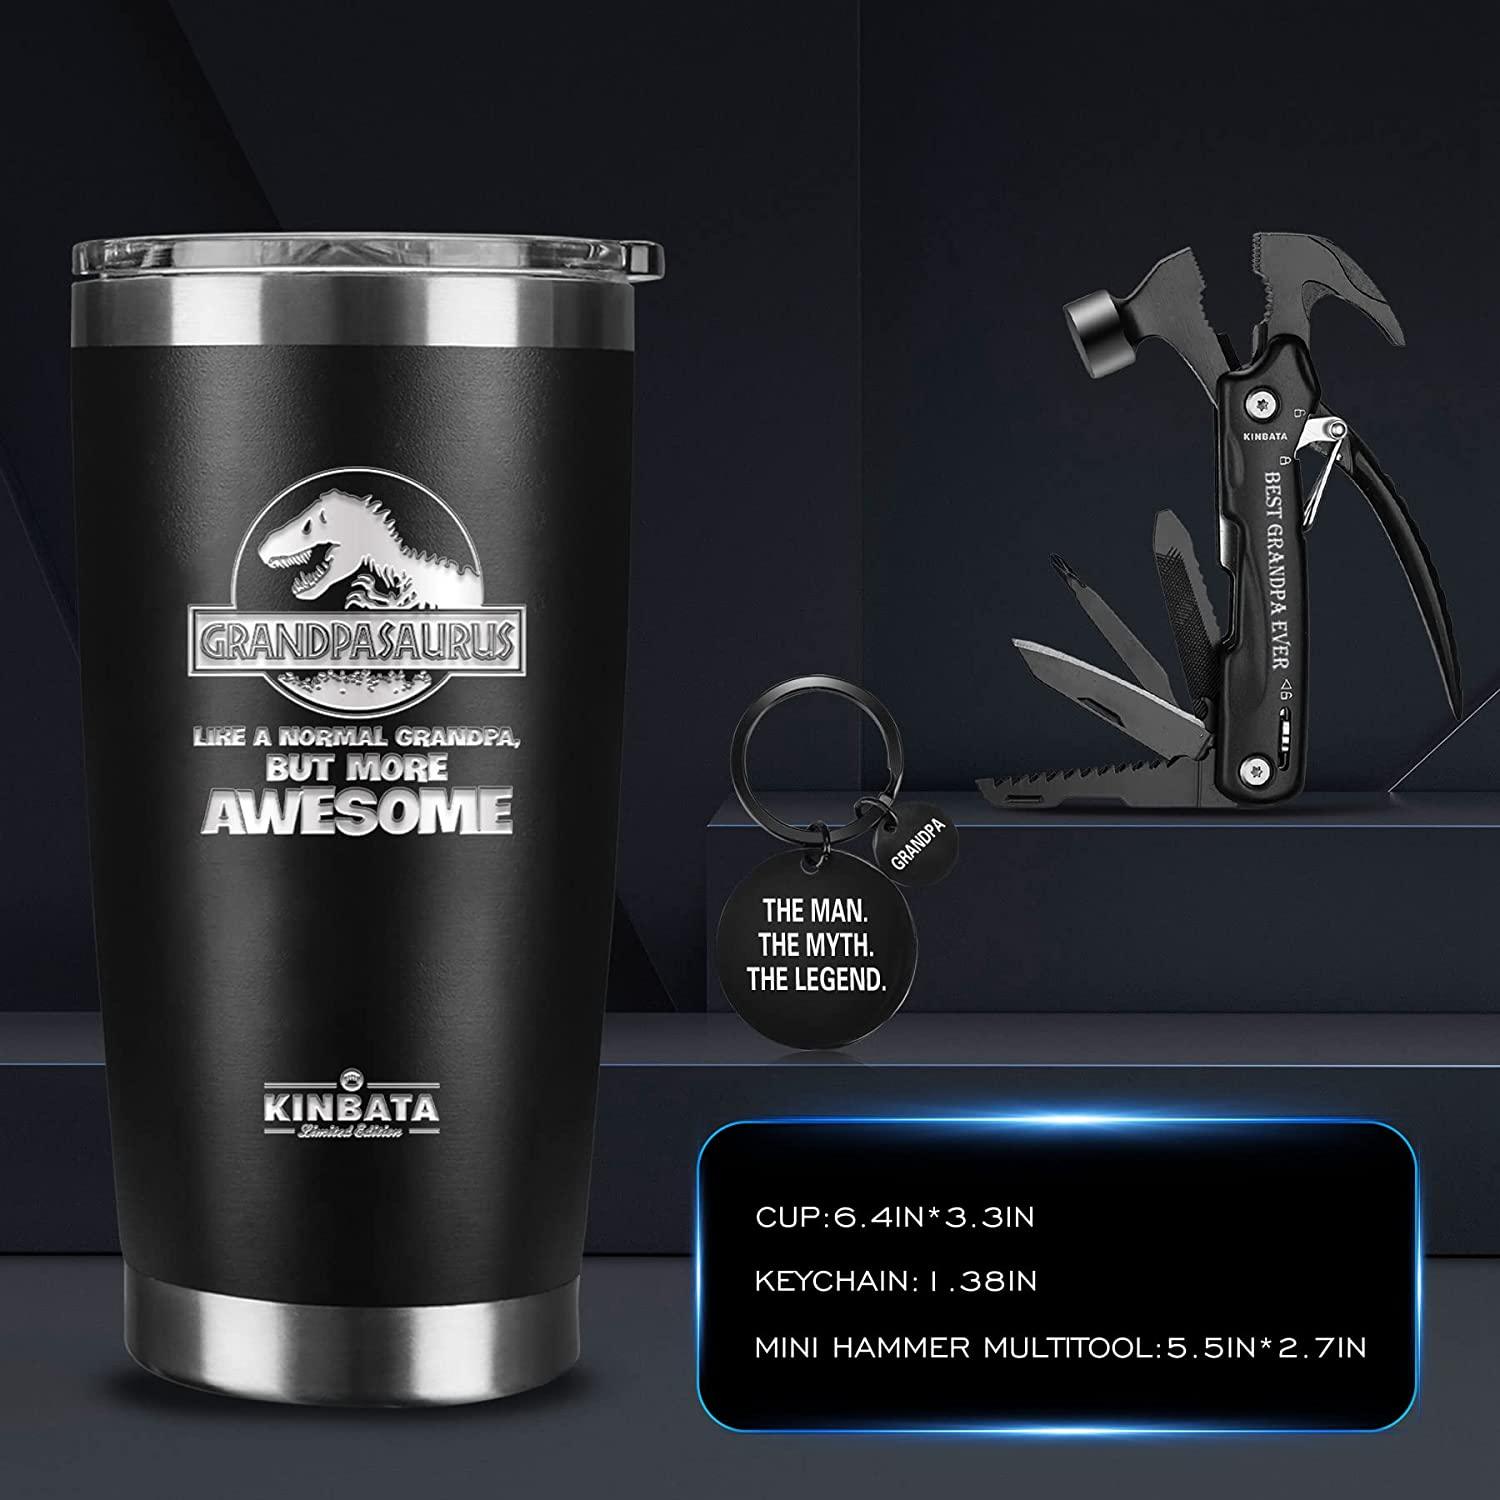 GrandpaSaurus Like a Normal Grandpa, But More Awesome Tumbler, 20 oz, Father's Day Gifts for Grandpa - TheGivenGet